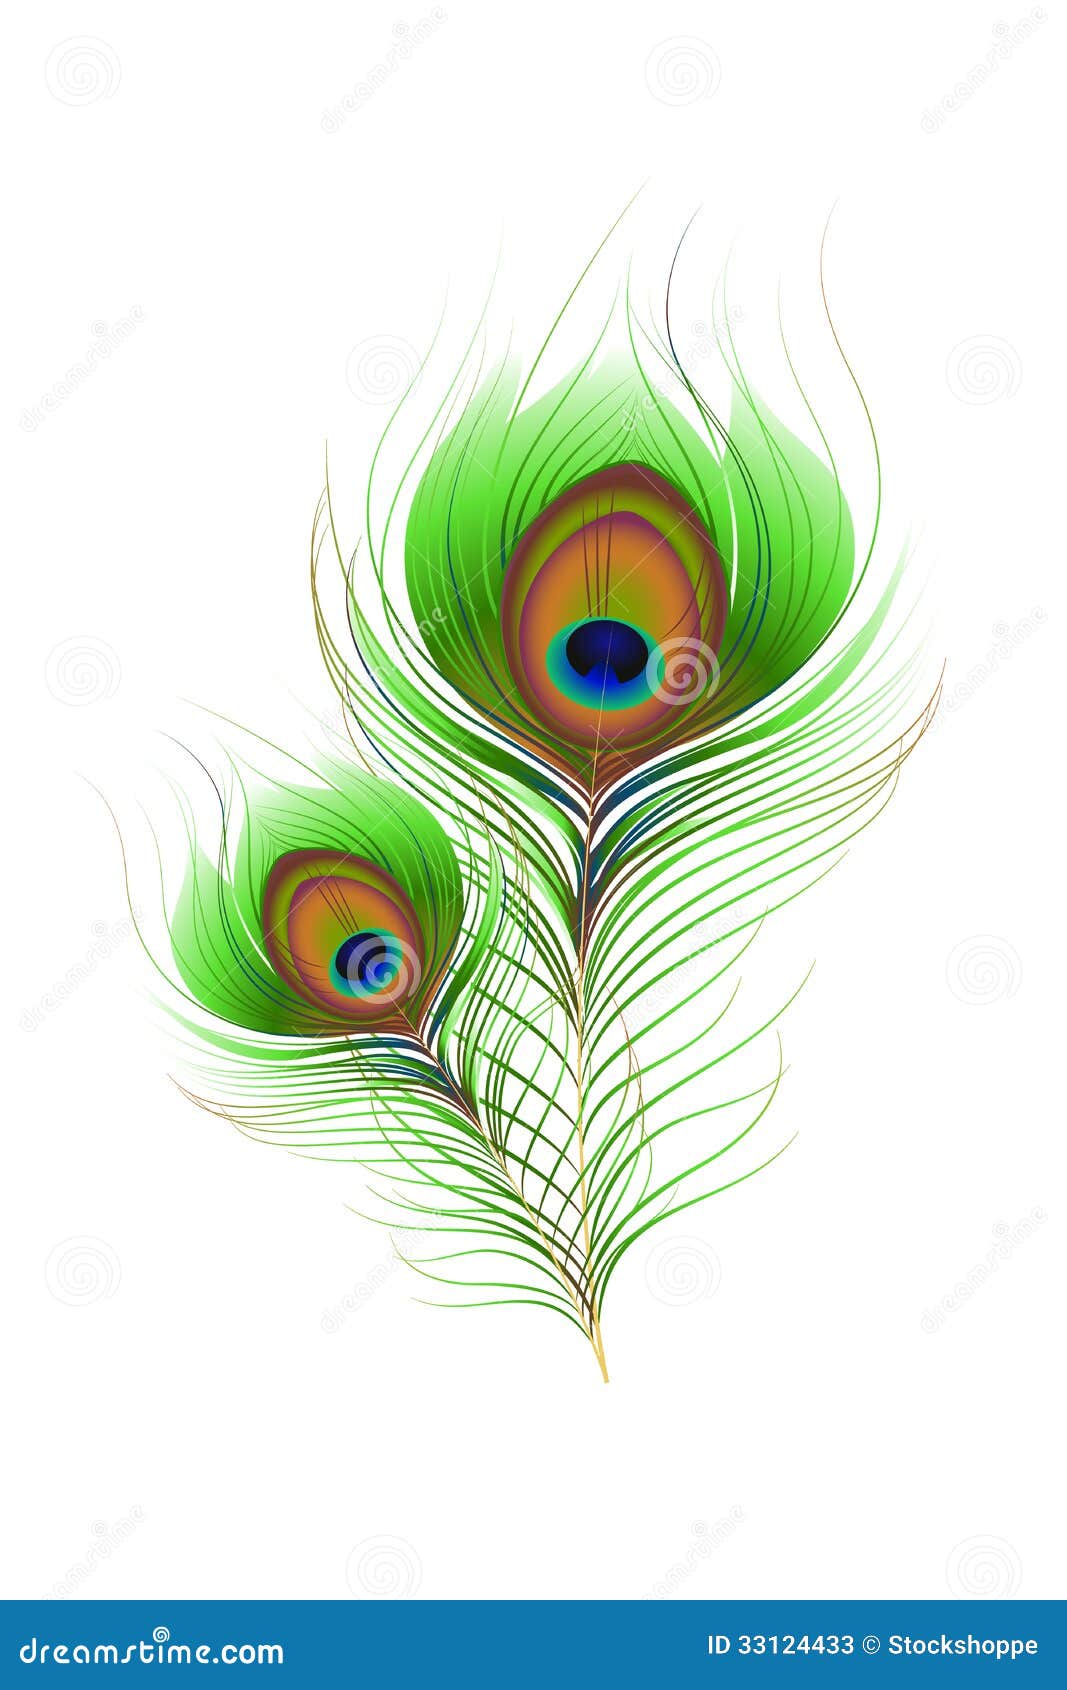 Colorful Peacock Feather stock vector. Illustration of creativity ...